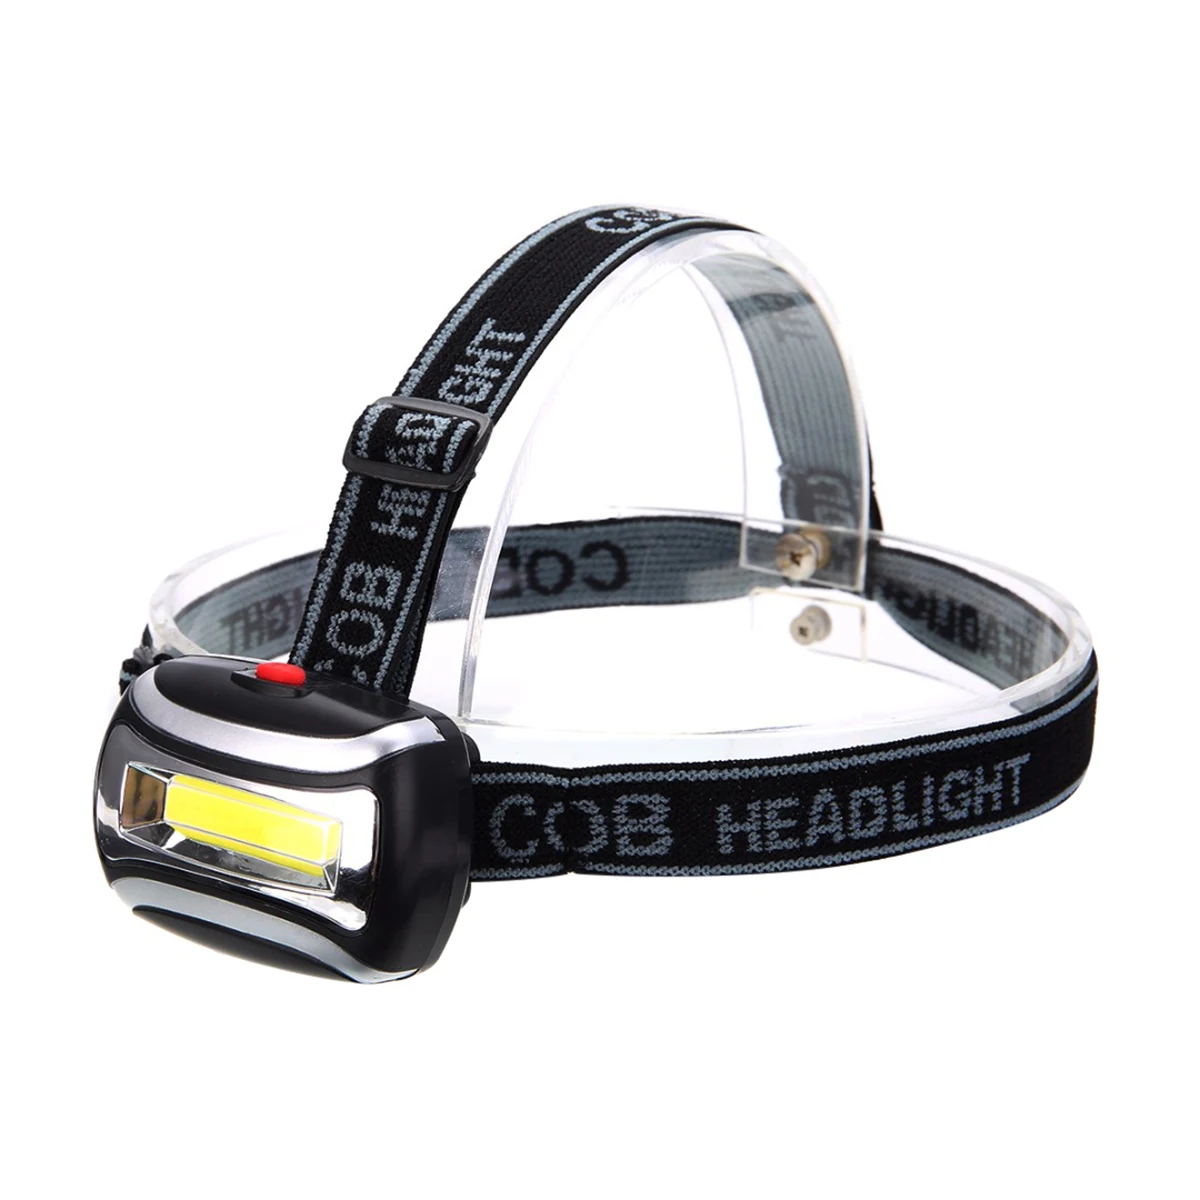 

3W COB Headlight 3 Modes Head Lamp Portable Headlamp 600 Lumens Home Flashlight Torches Working Lights for Outdoor